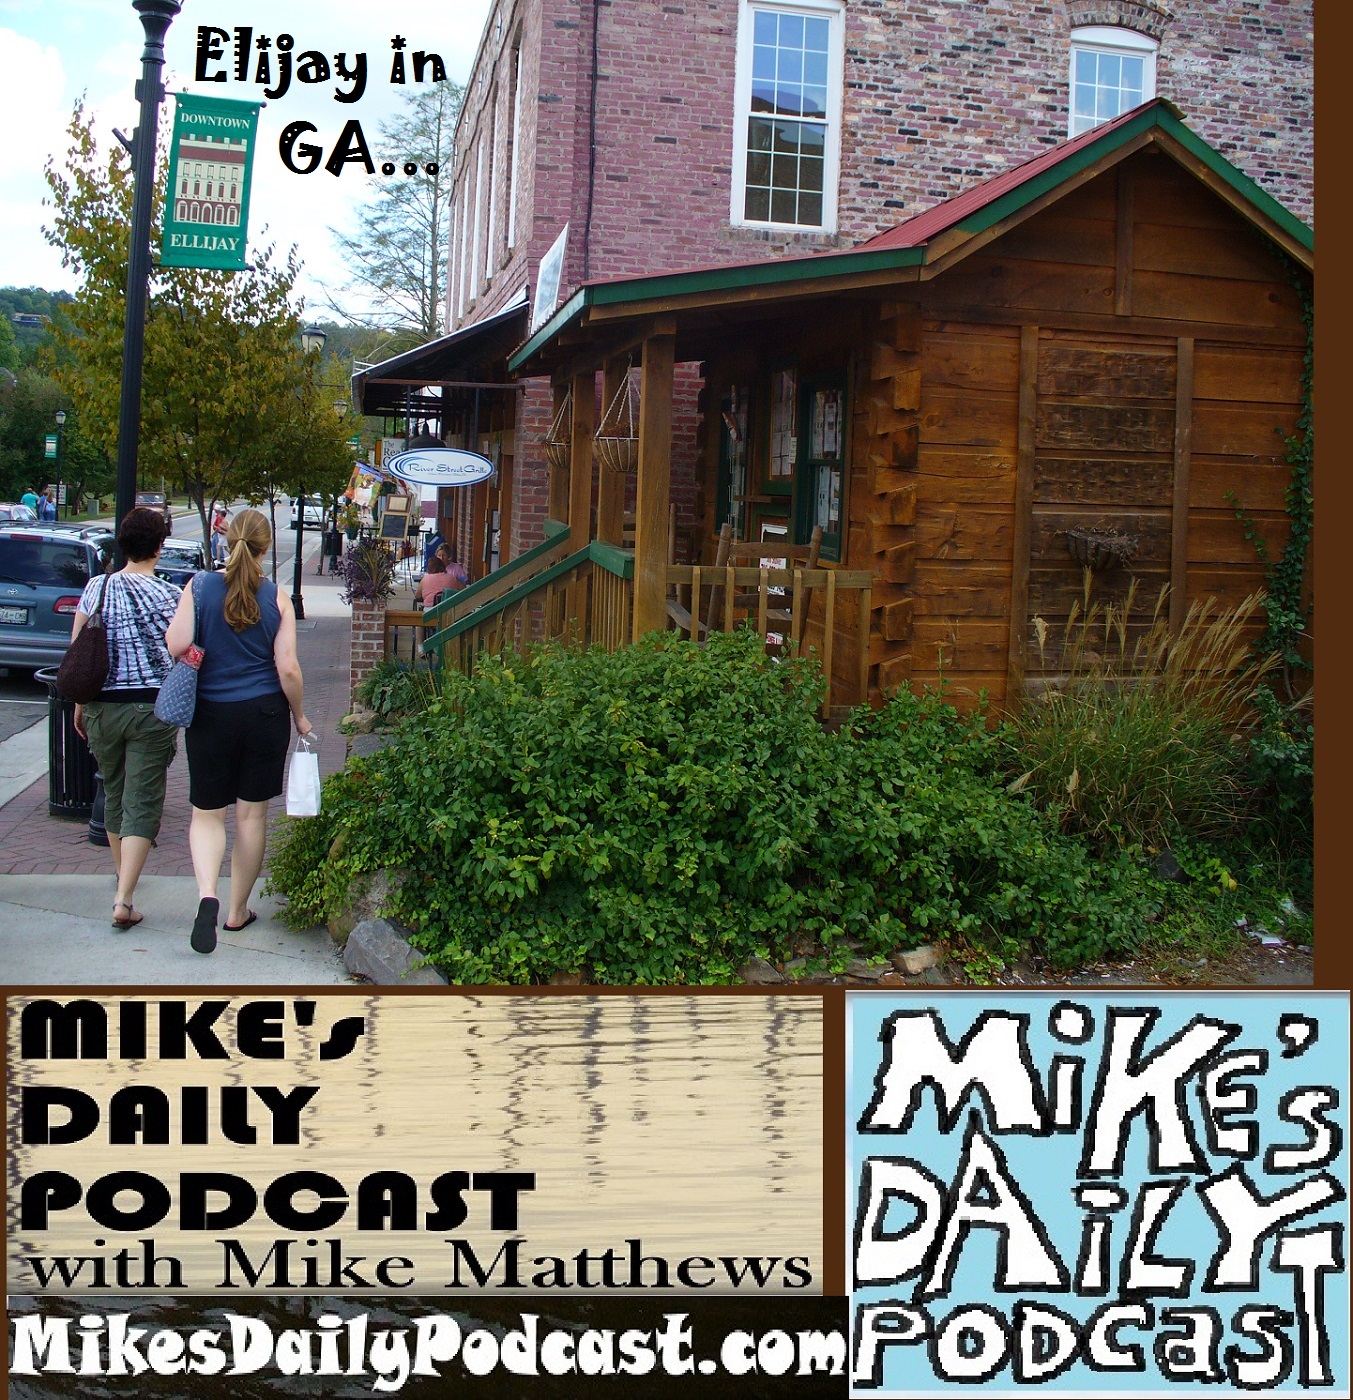 MIKEs DAILY PODCAST 1145 downtown Ellijay Georgia